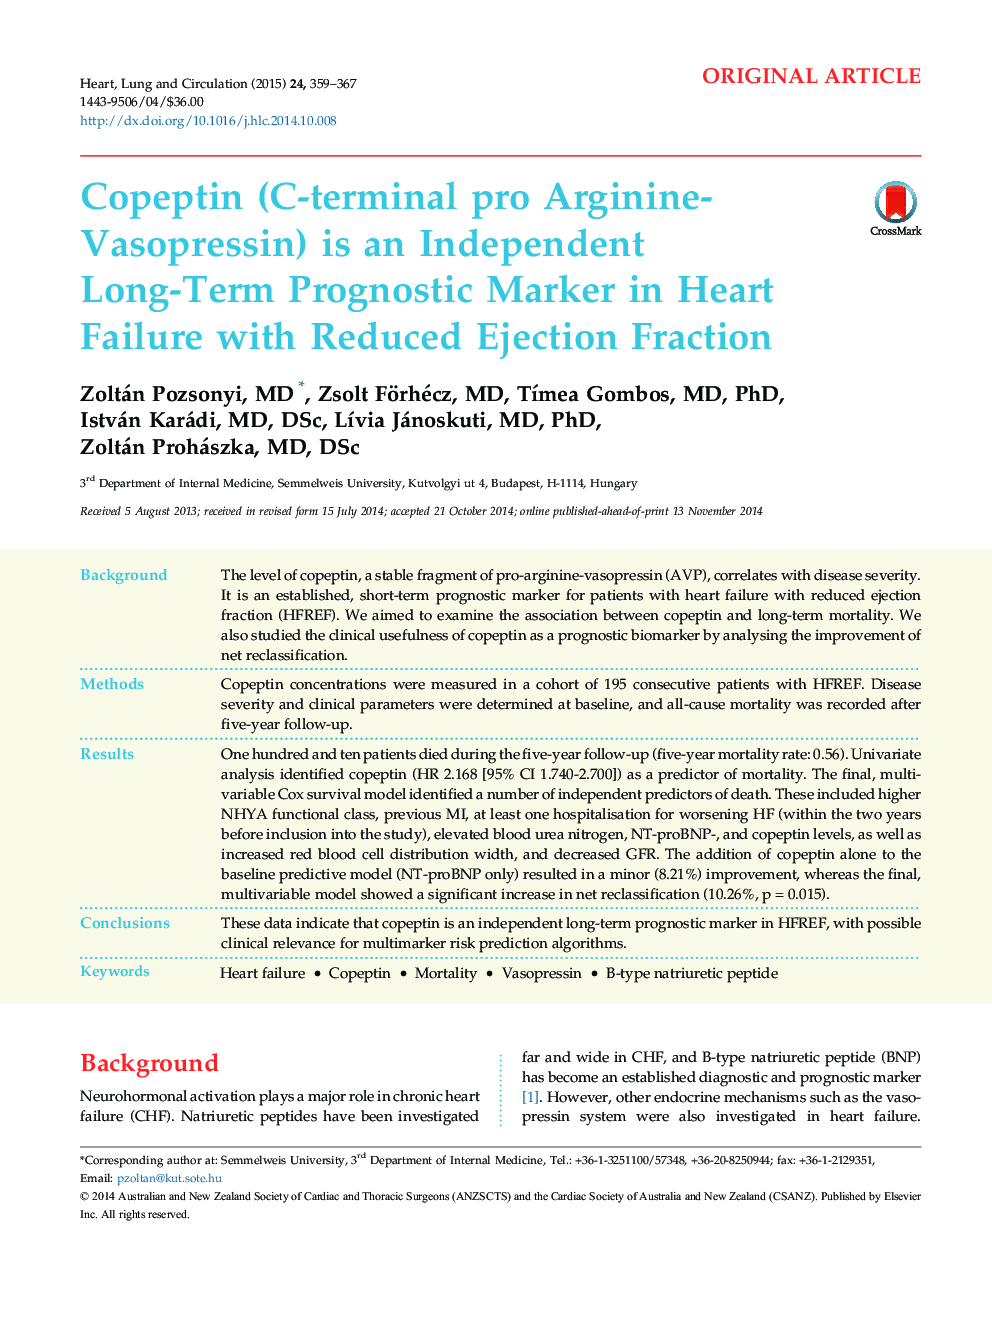 Copeptin (C-terminal pro Arginine-Vasopressin) is an Independent Long-Term Prognostic Marker in Heart Failure with Reduced Ejection Fraction